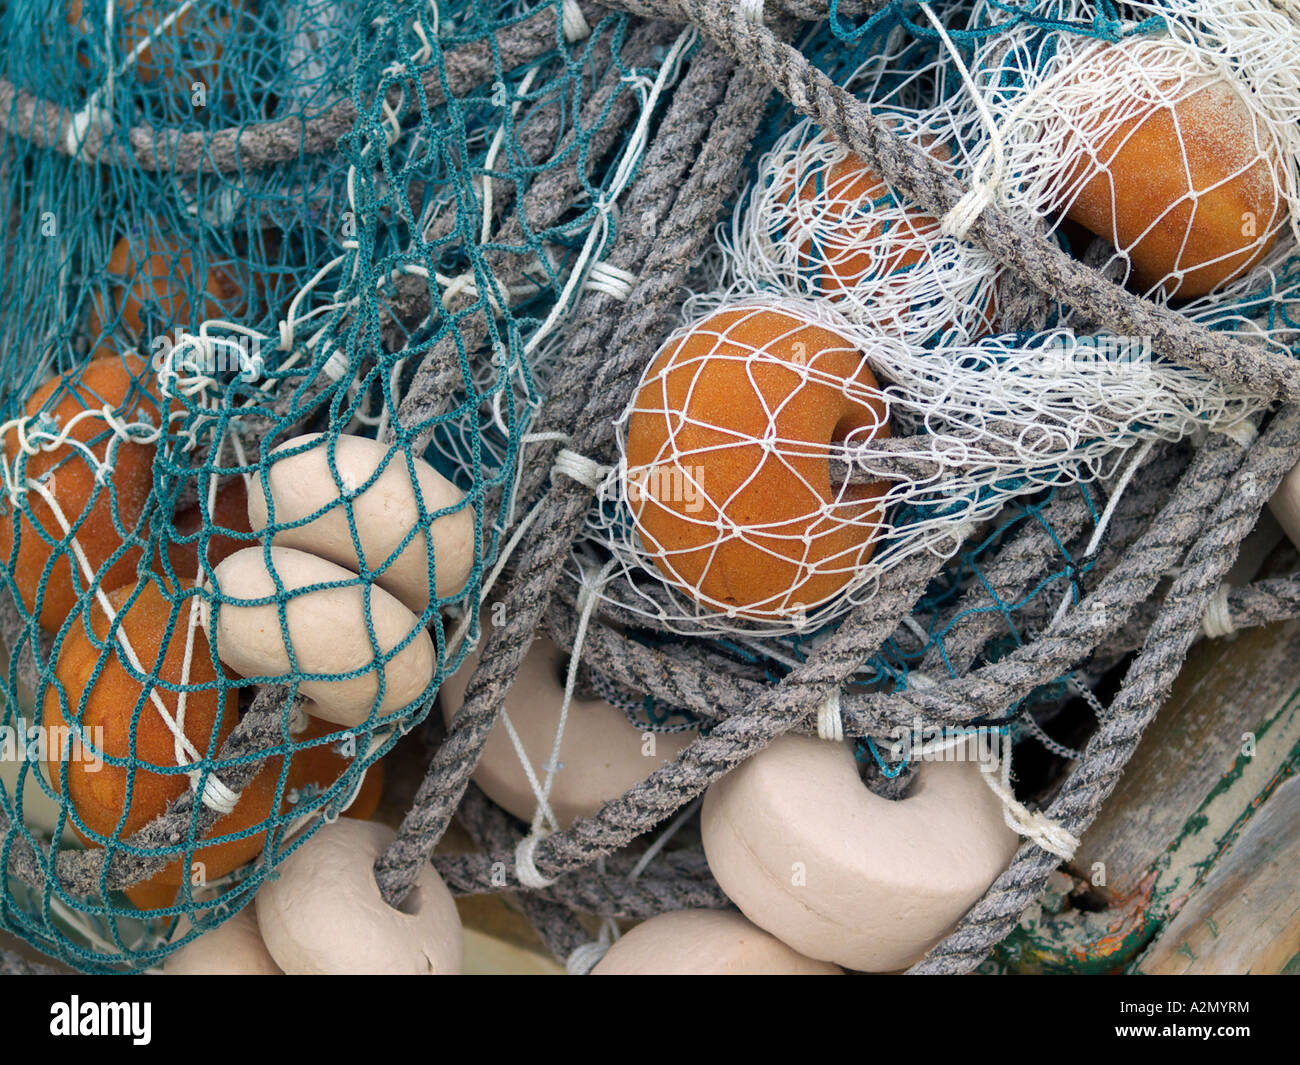 https://c8.alamy.com/comp/A2MYRM/tangled-blue-and-white-fishing-nets-with-ropes-and-floats-buoys-A2MYRM.jpg